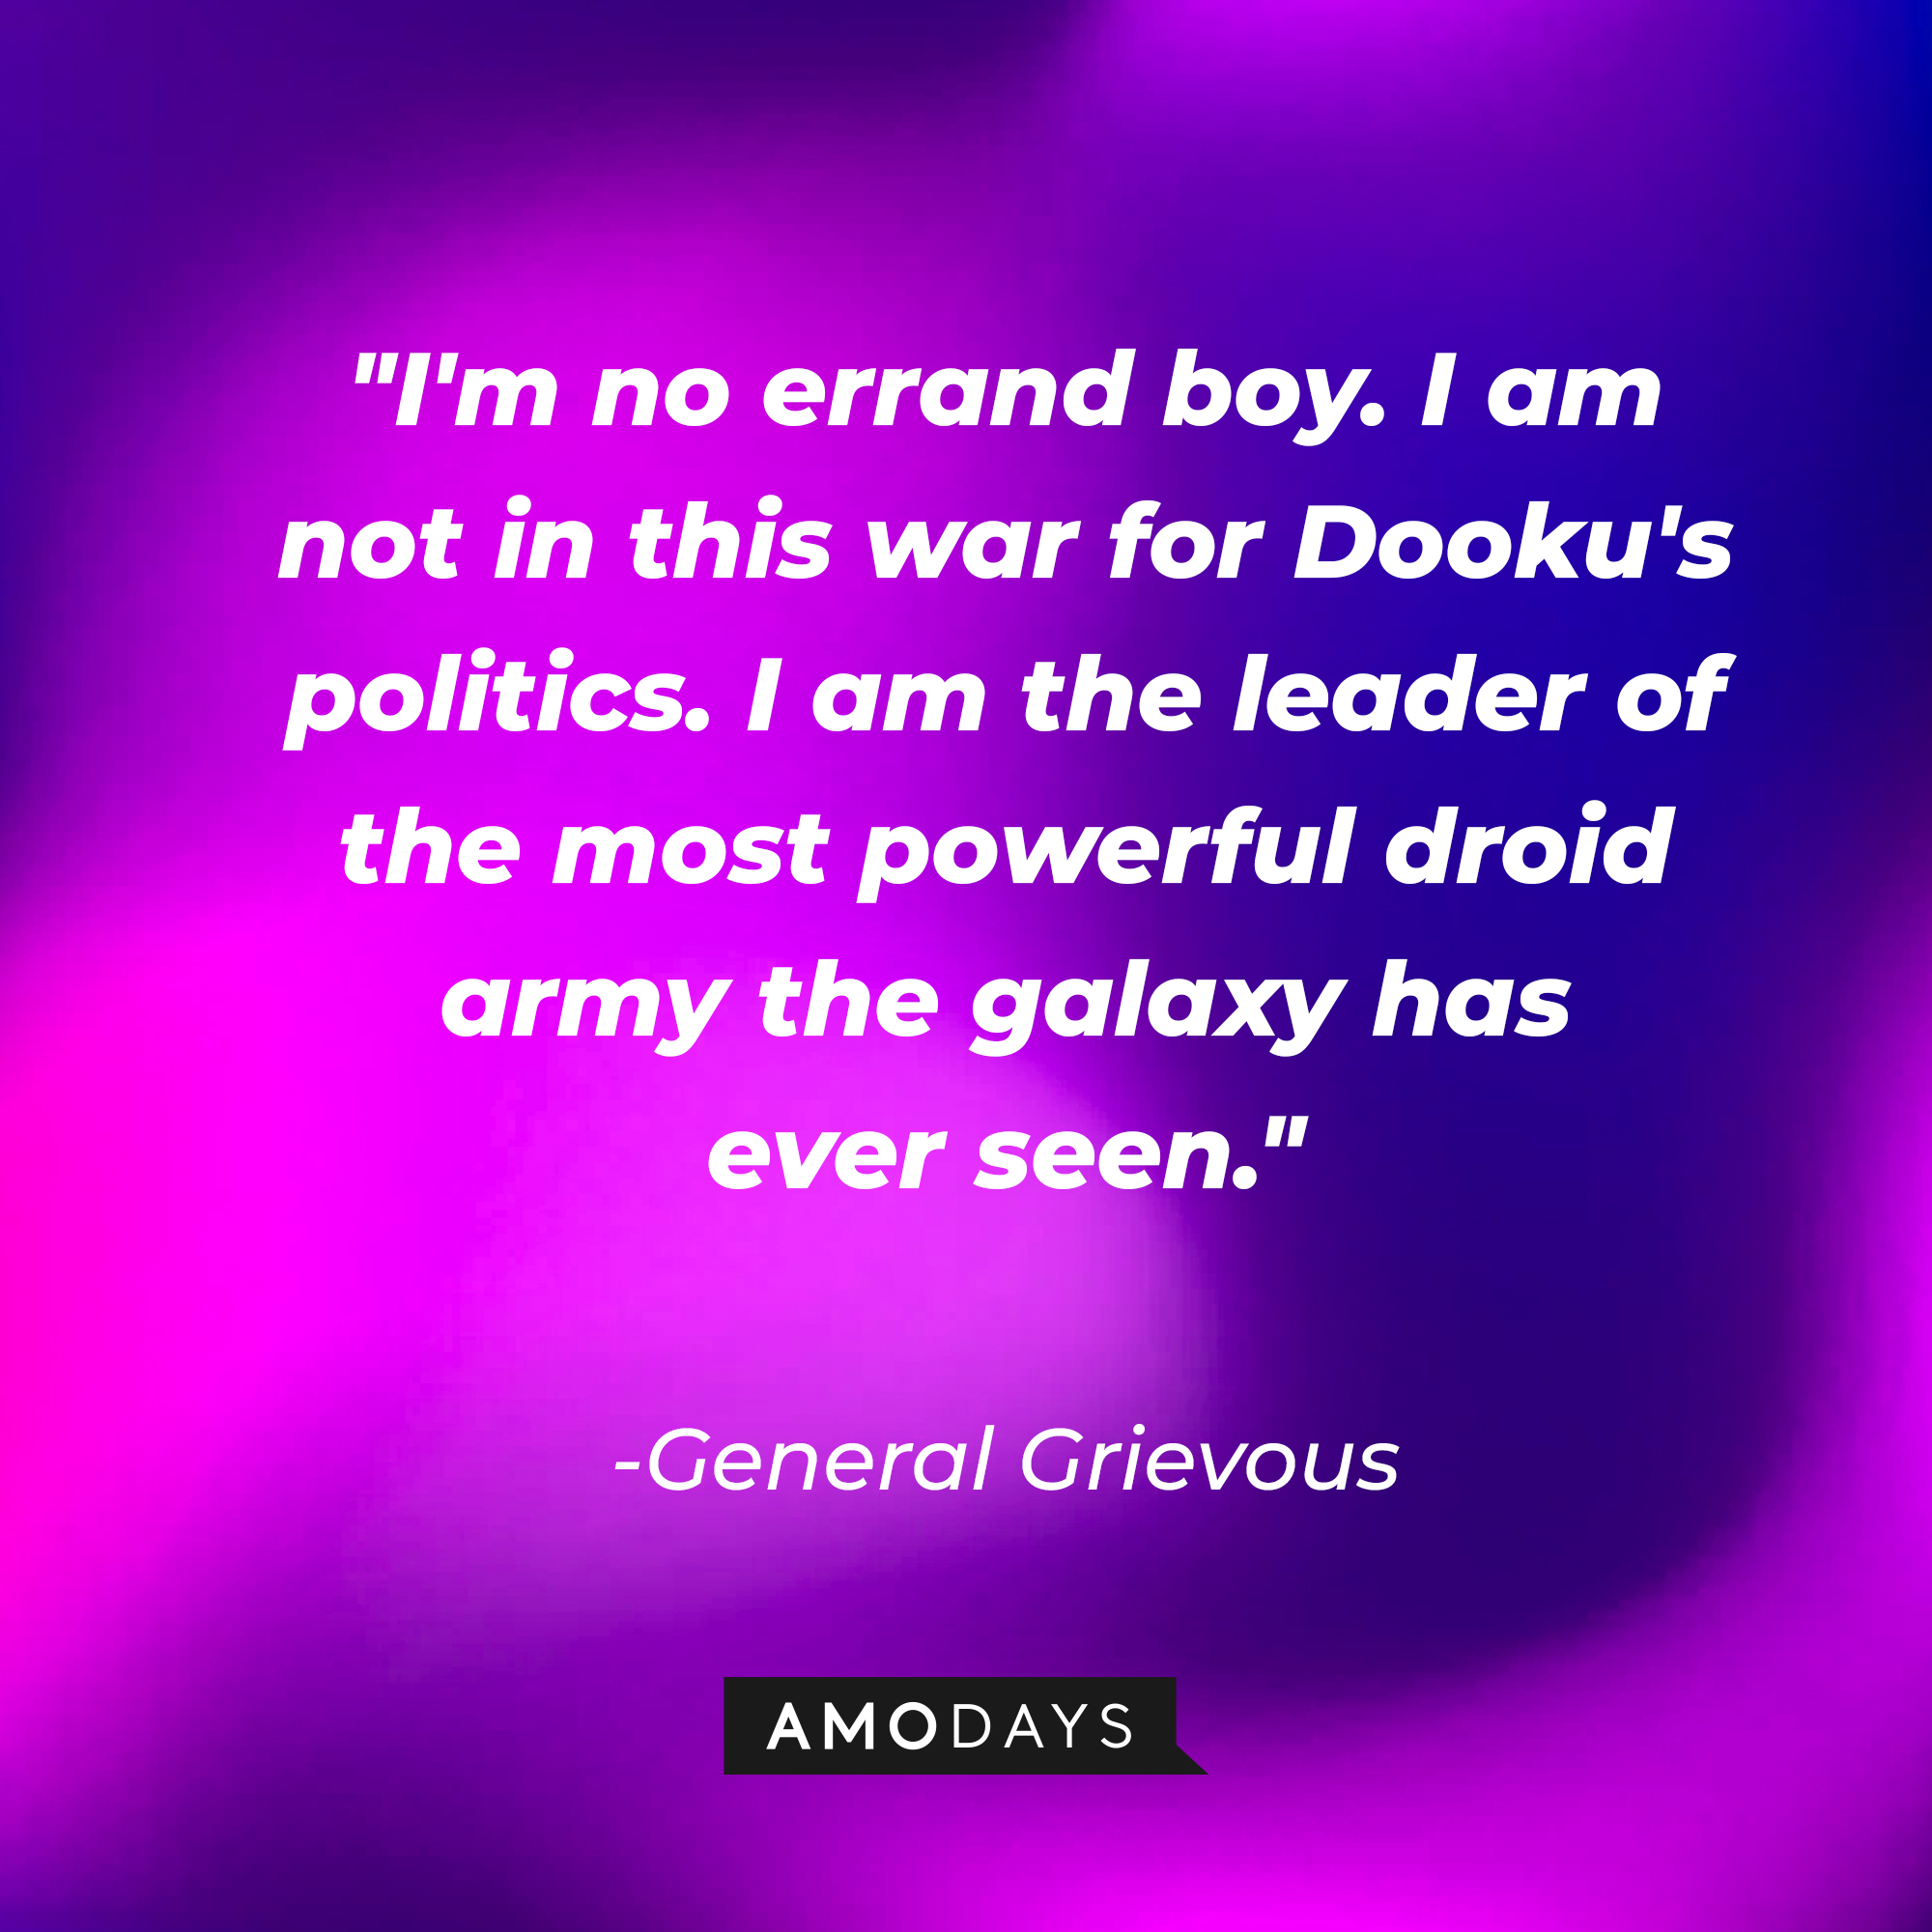 General Grievous' quote: "I'm no errand boy. I am not in this war for Dooku's politics. I am the leader of the most powerful droid army the galaxy has ever seen." | Source: AmoDays